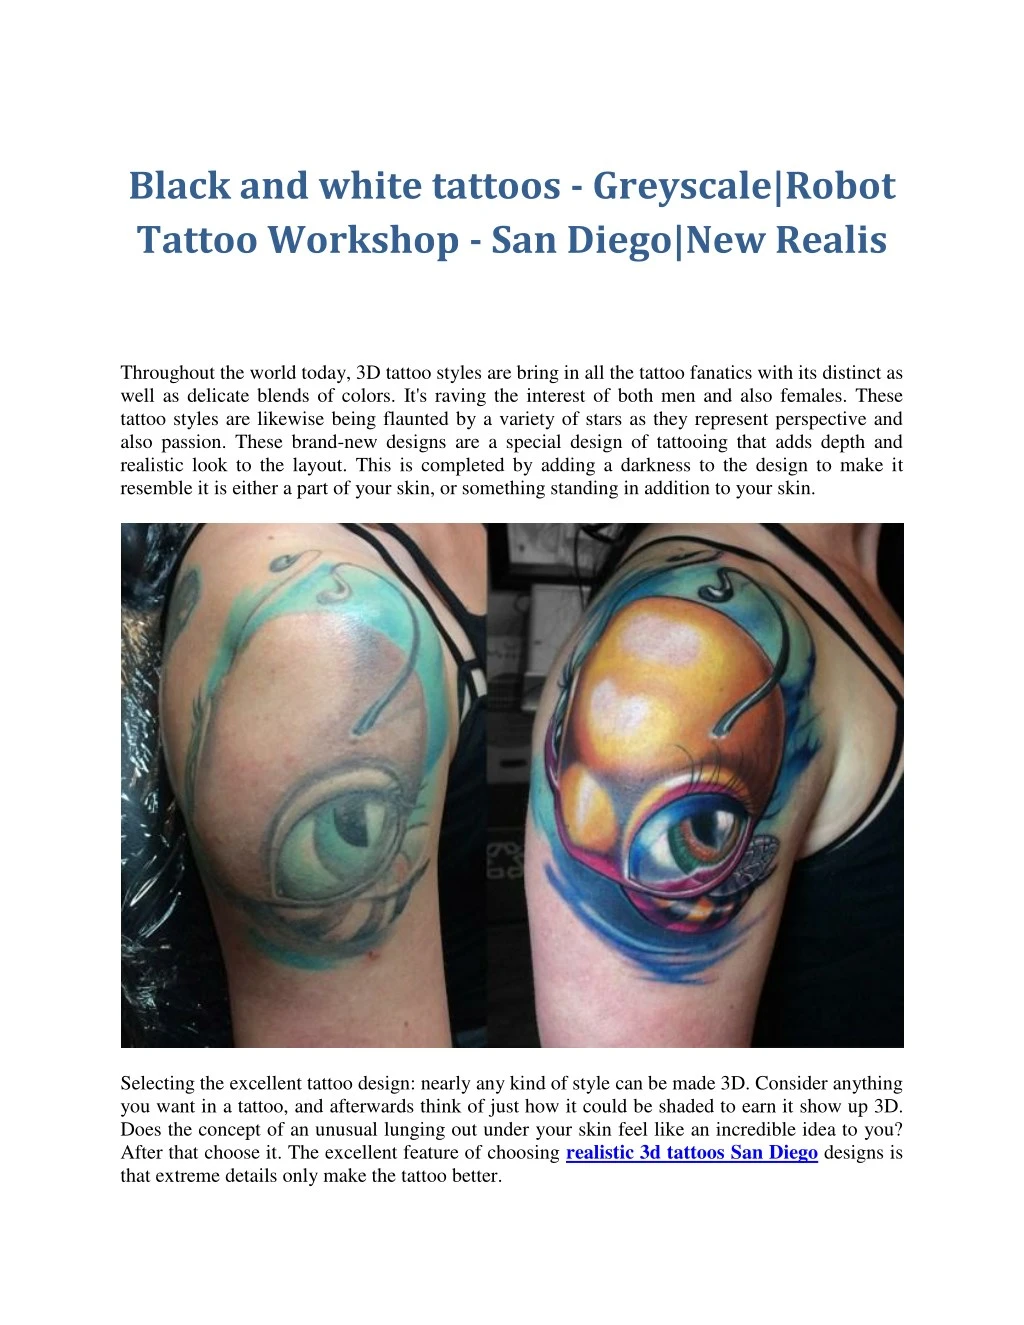 black and white tattoos greyscale robot tattoo